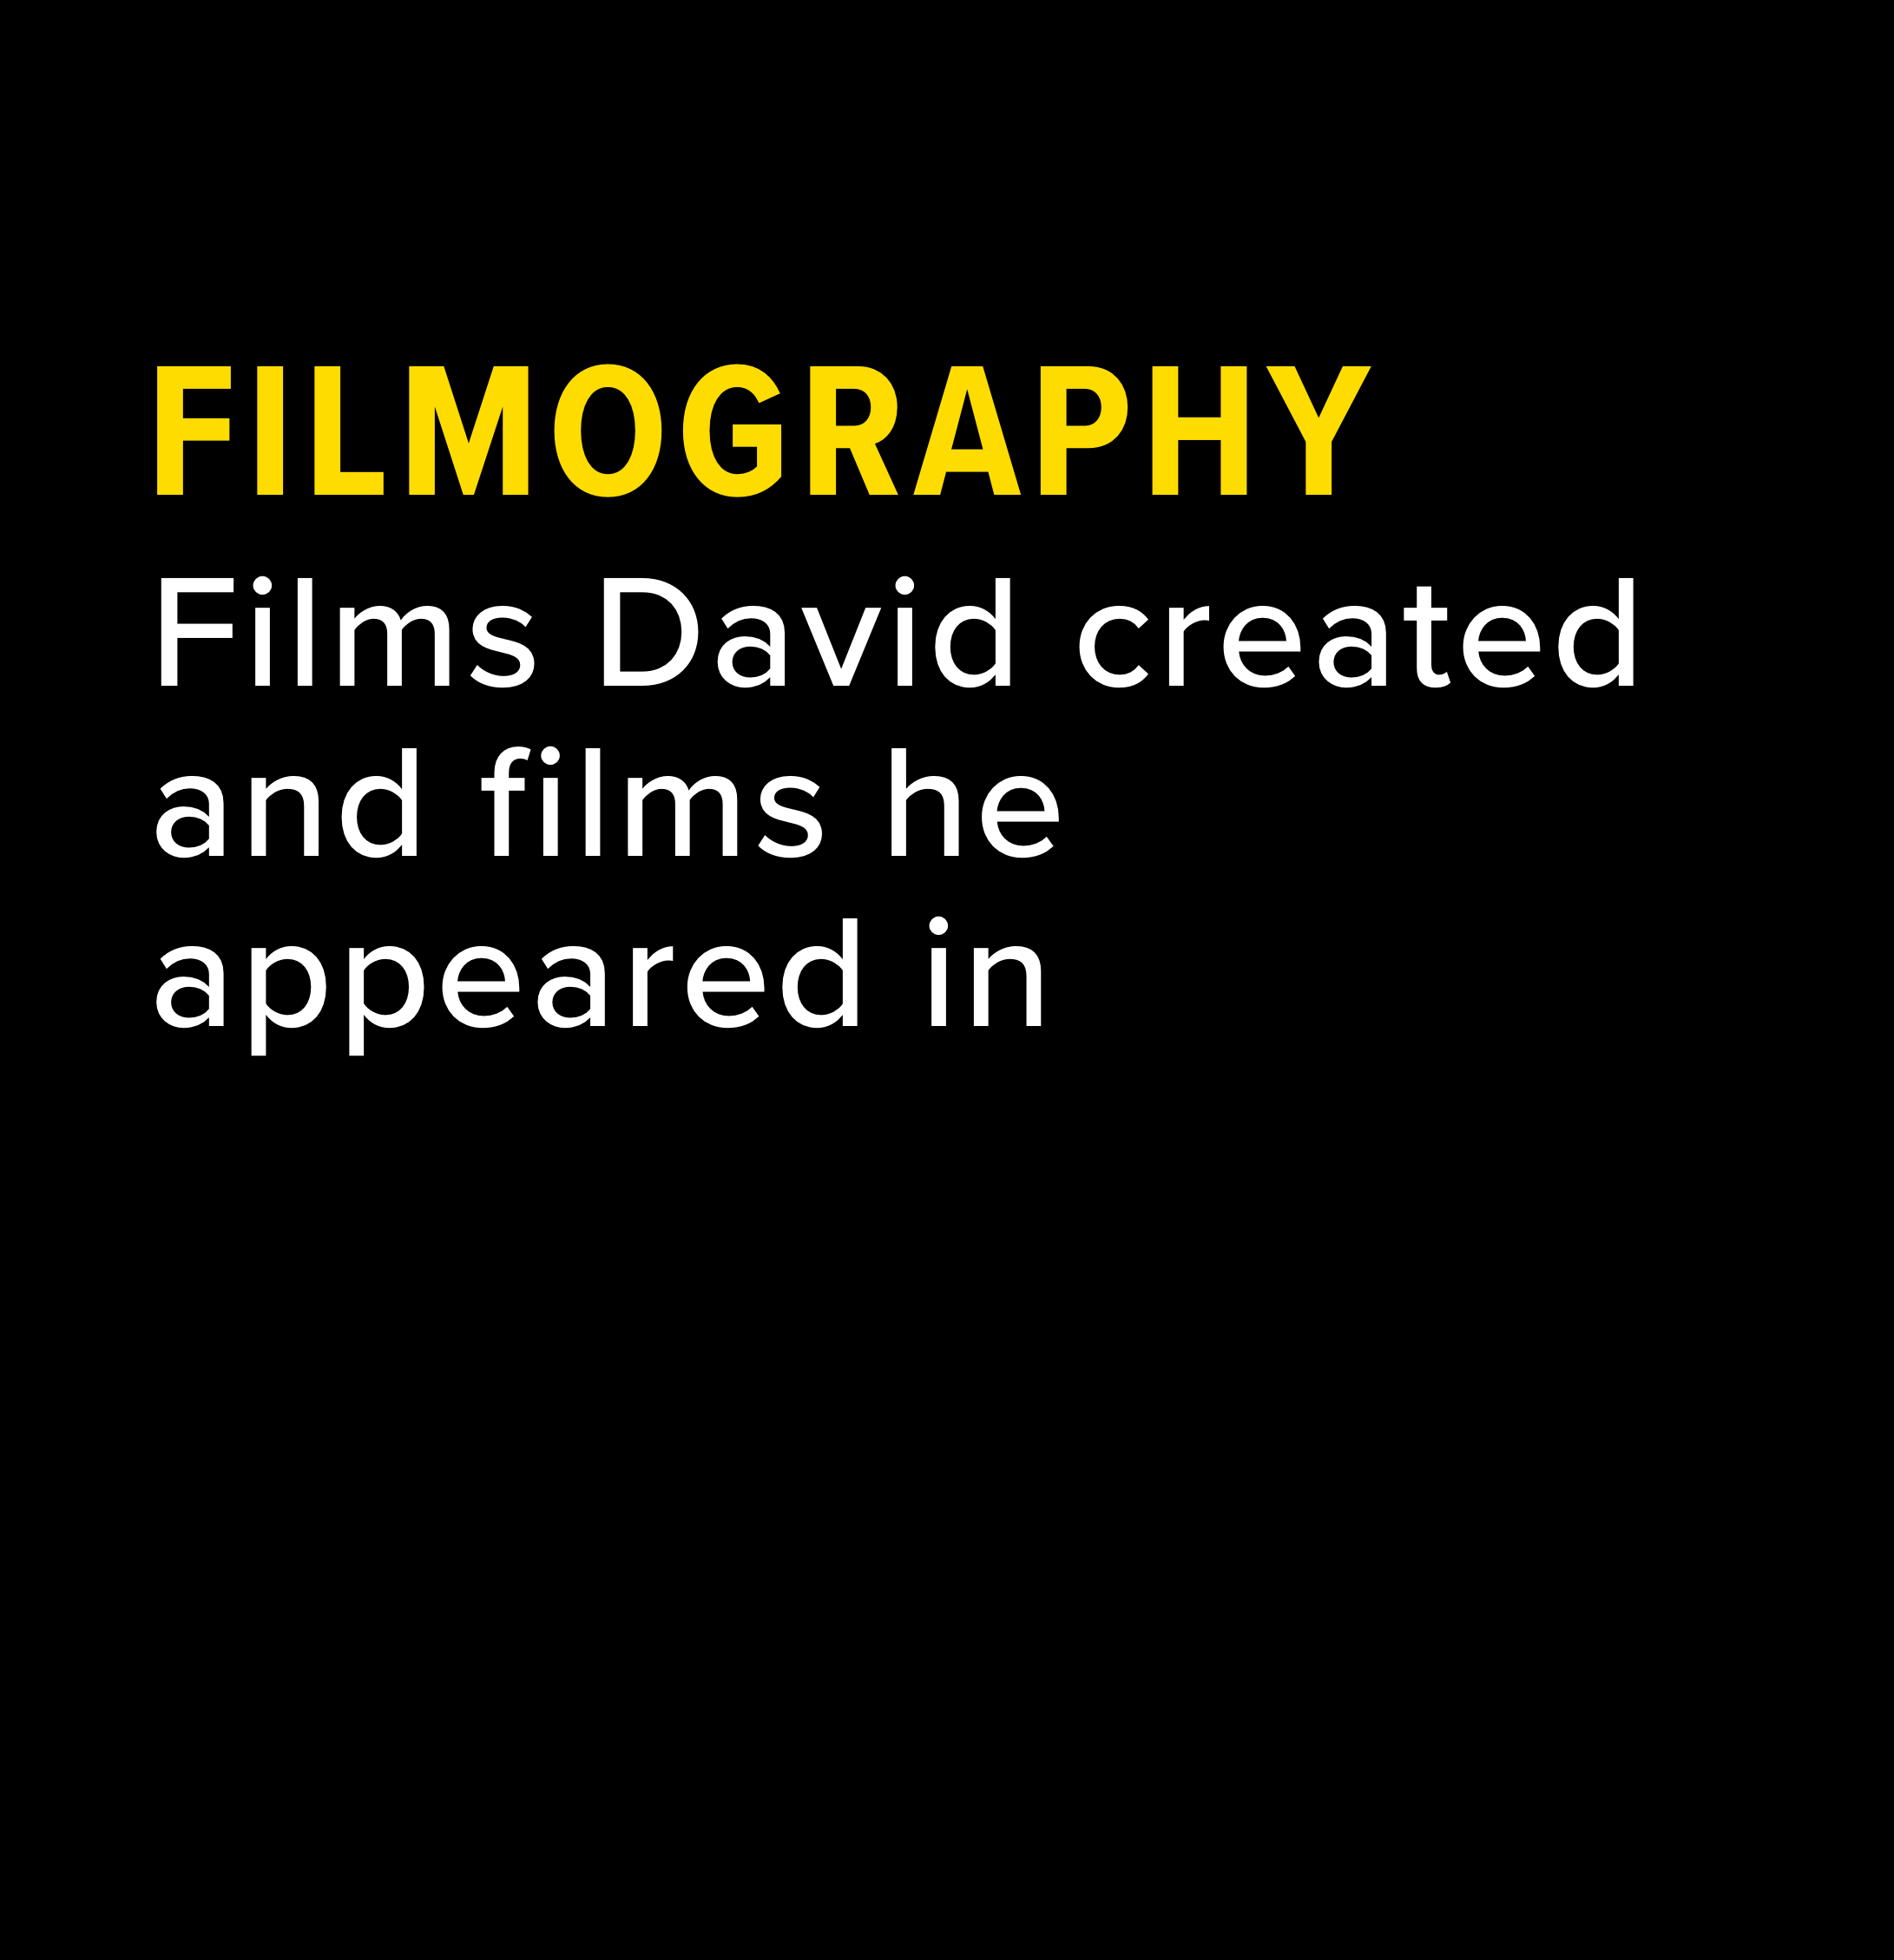 Films David created and films he appeared in